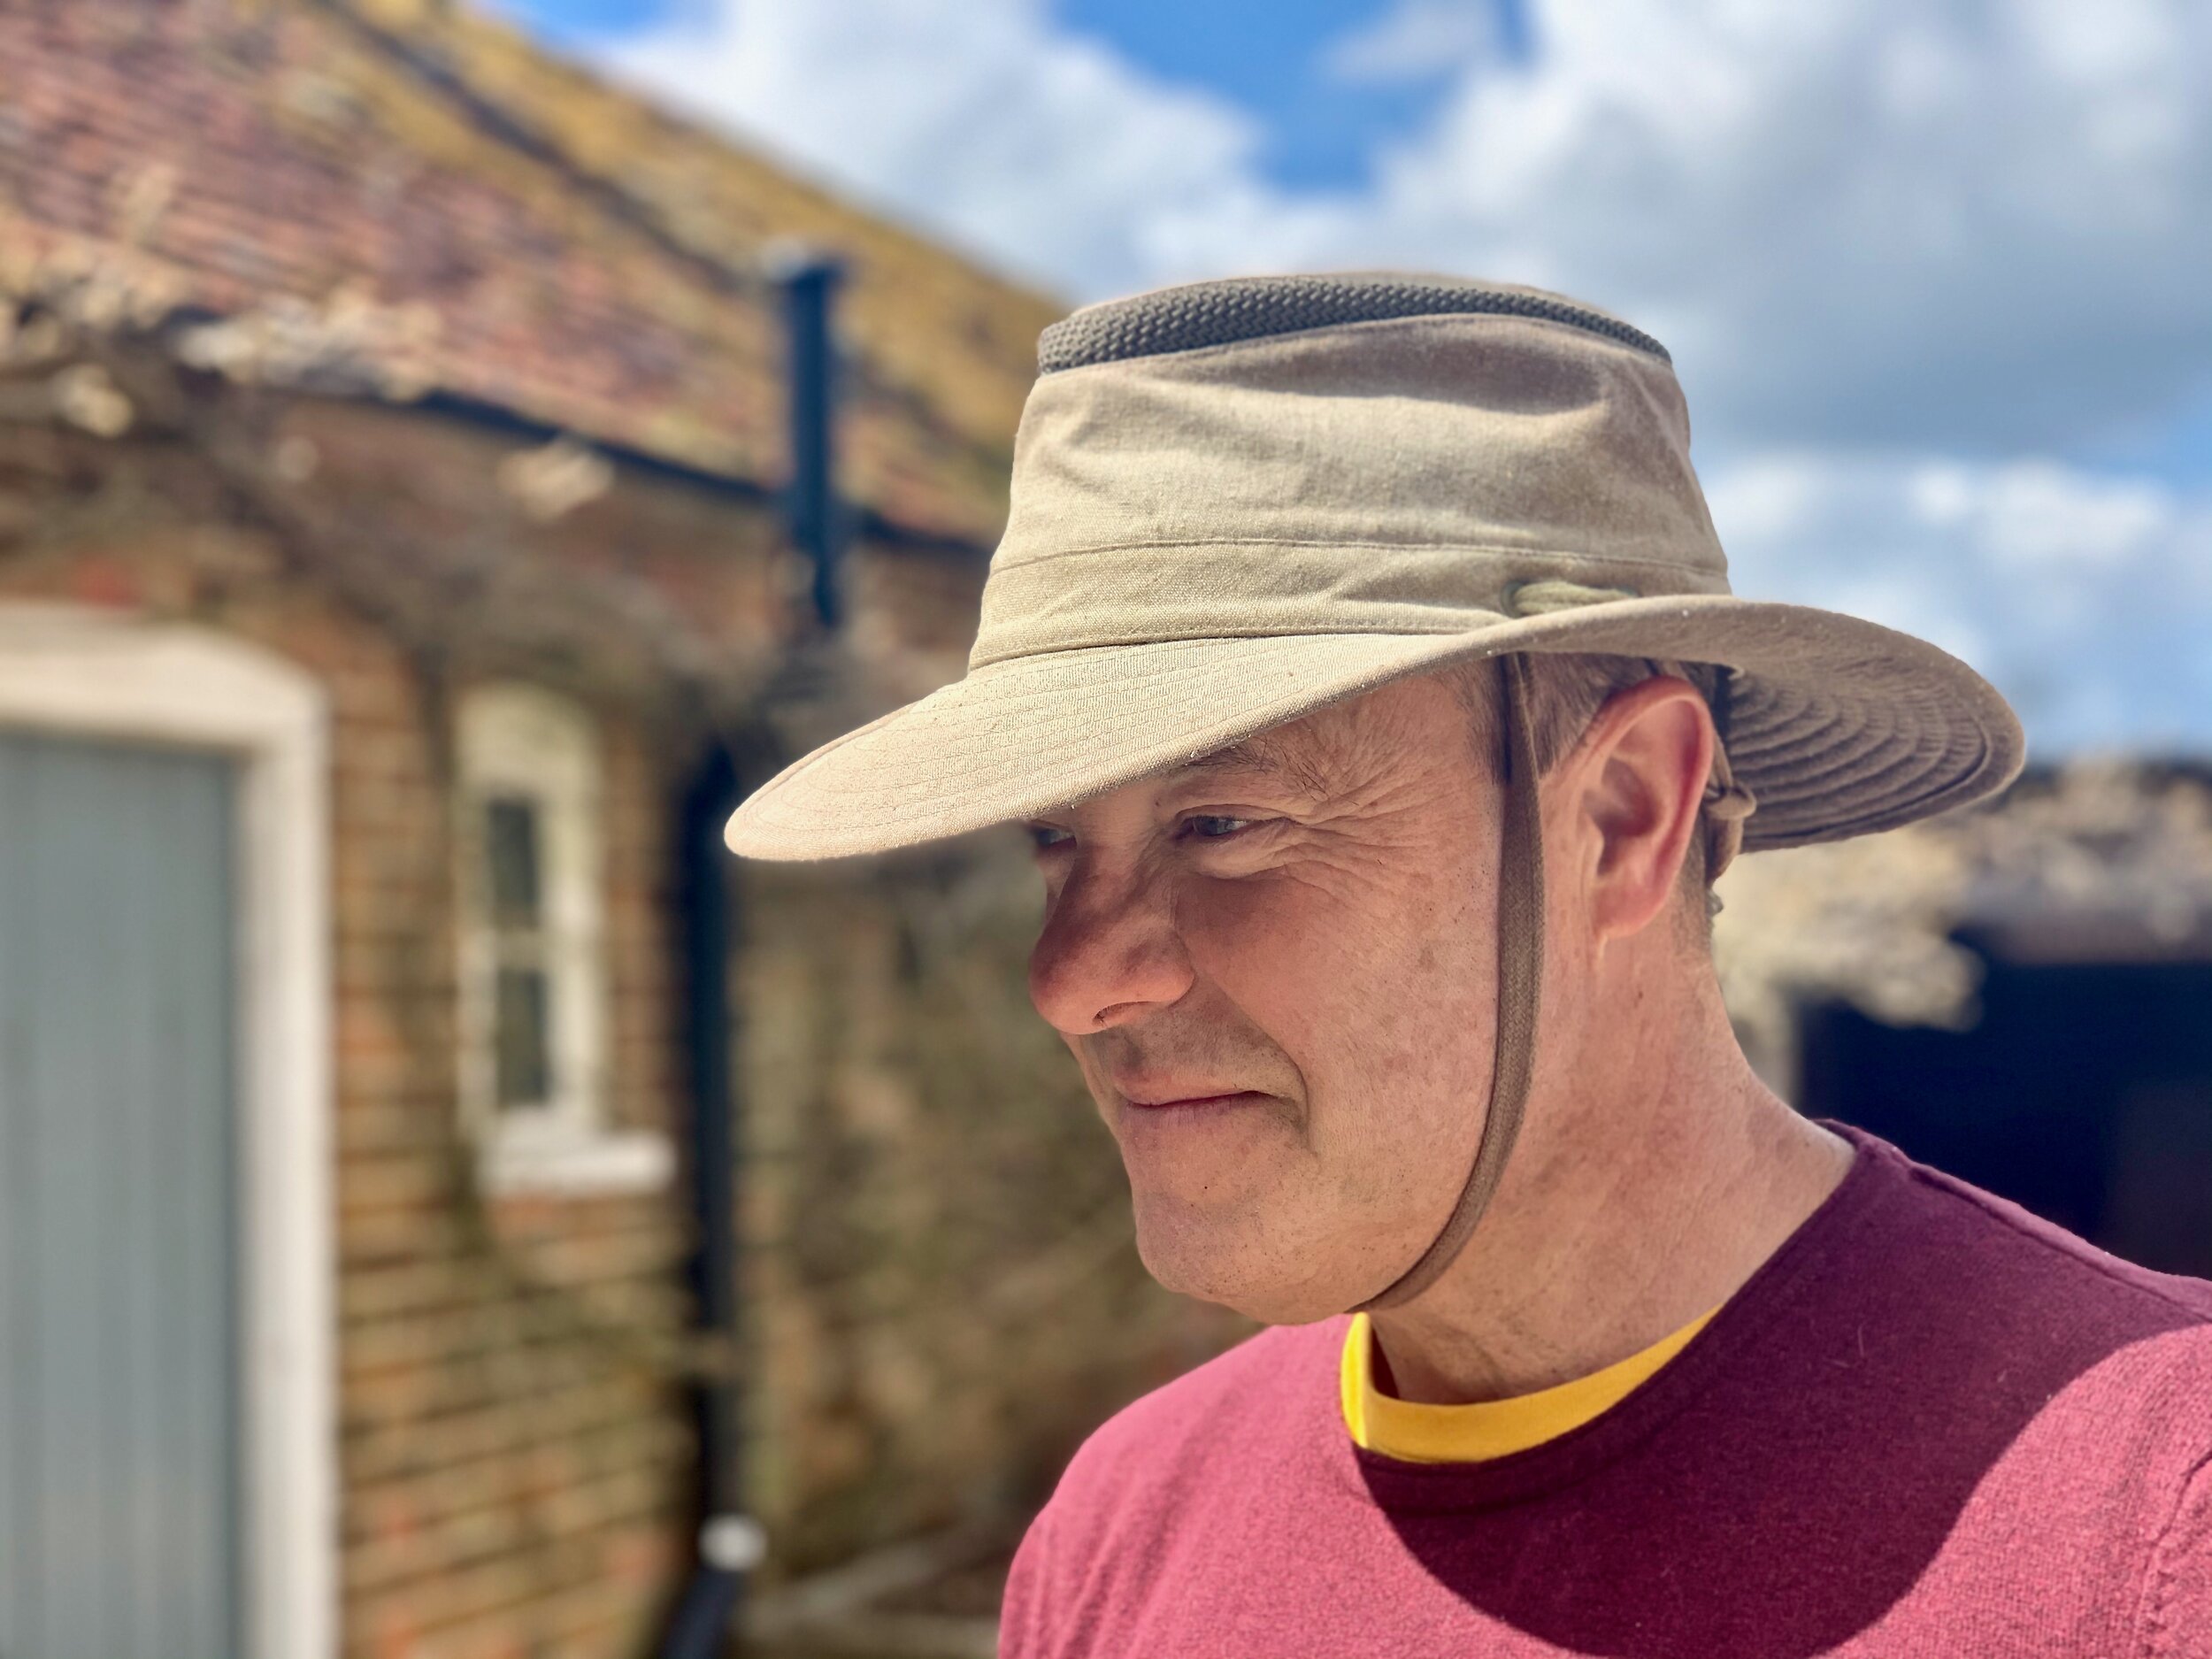 Tilley Mashup Airflo Hat Review